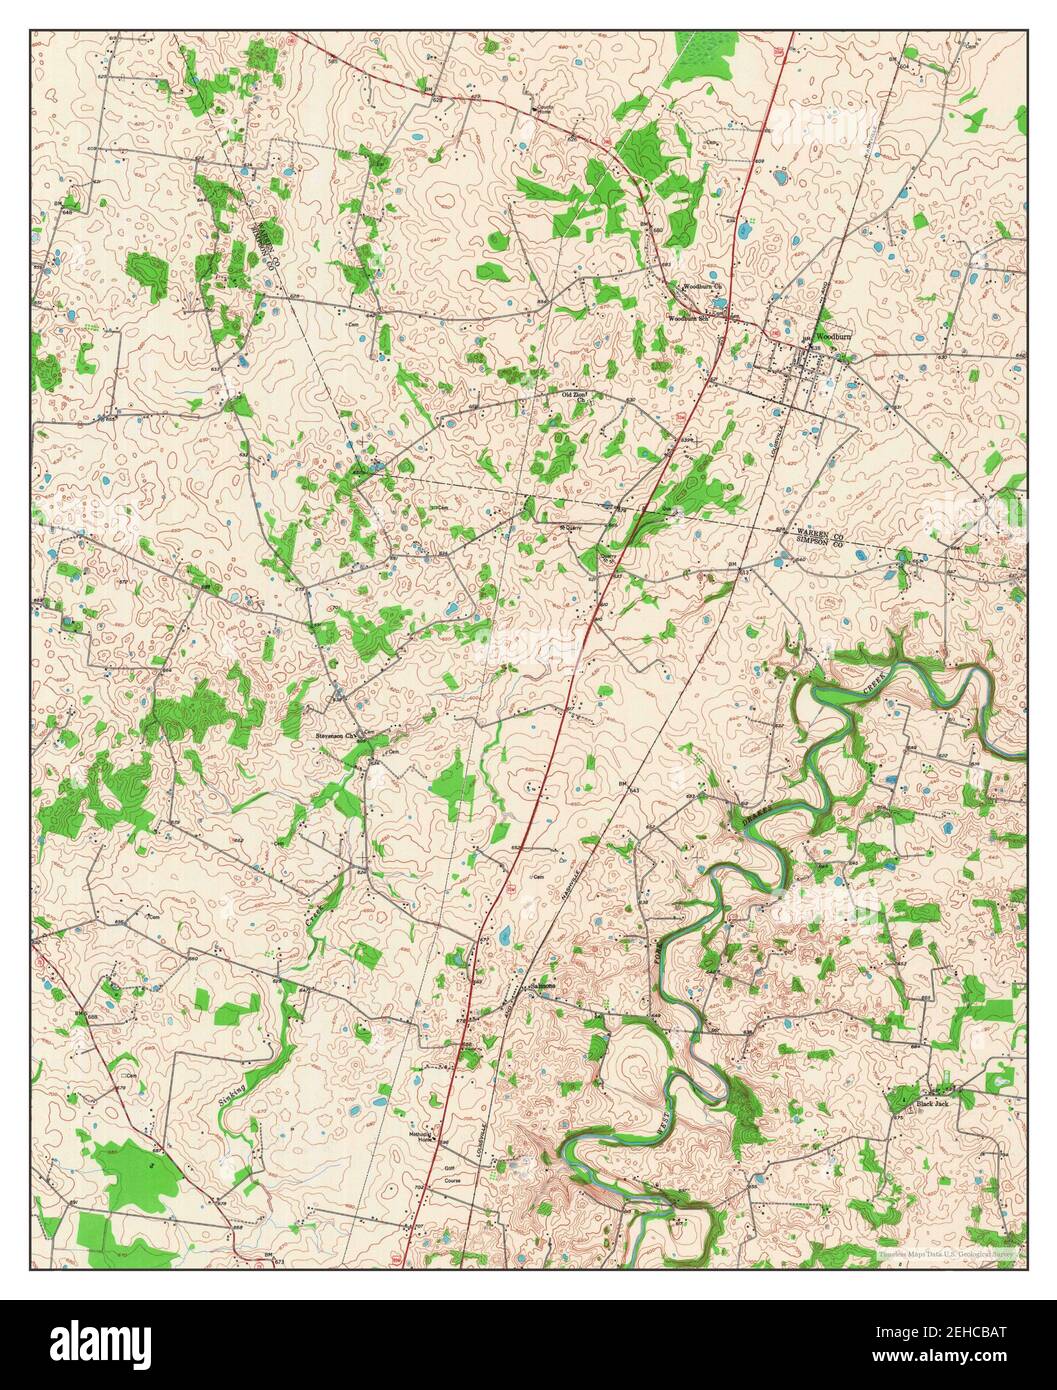 Woodburn, Kentucky, map 1951, 1:24000, United States of America by Timeless Maps, data U.S. Geological Survey Stock Photo